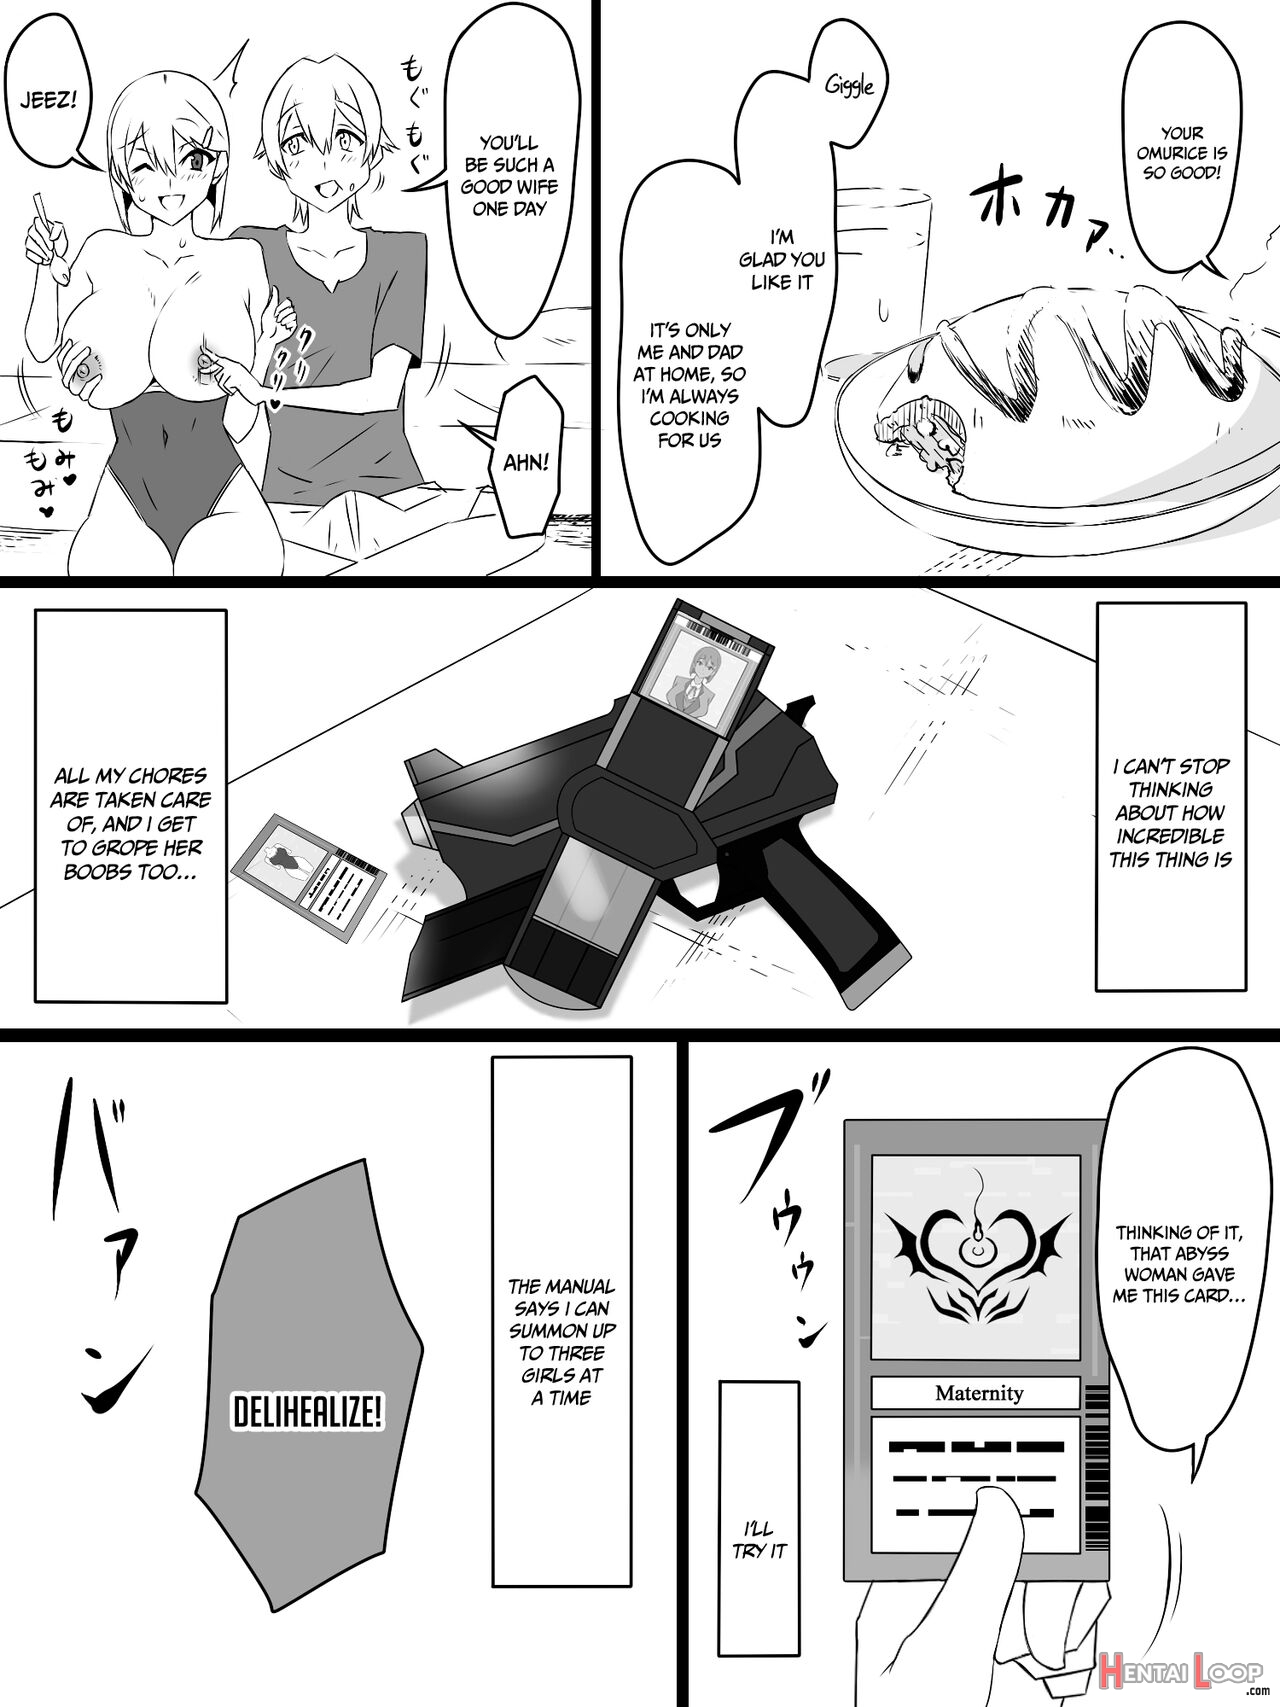 Shoukanjuu Dx Delihealizer Ver. 2 ~a Story About Summoning Girls From Cards To Fuck Them~ page 4